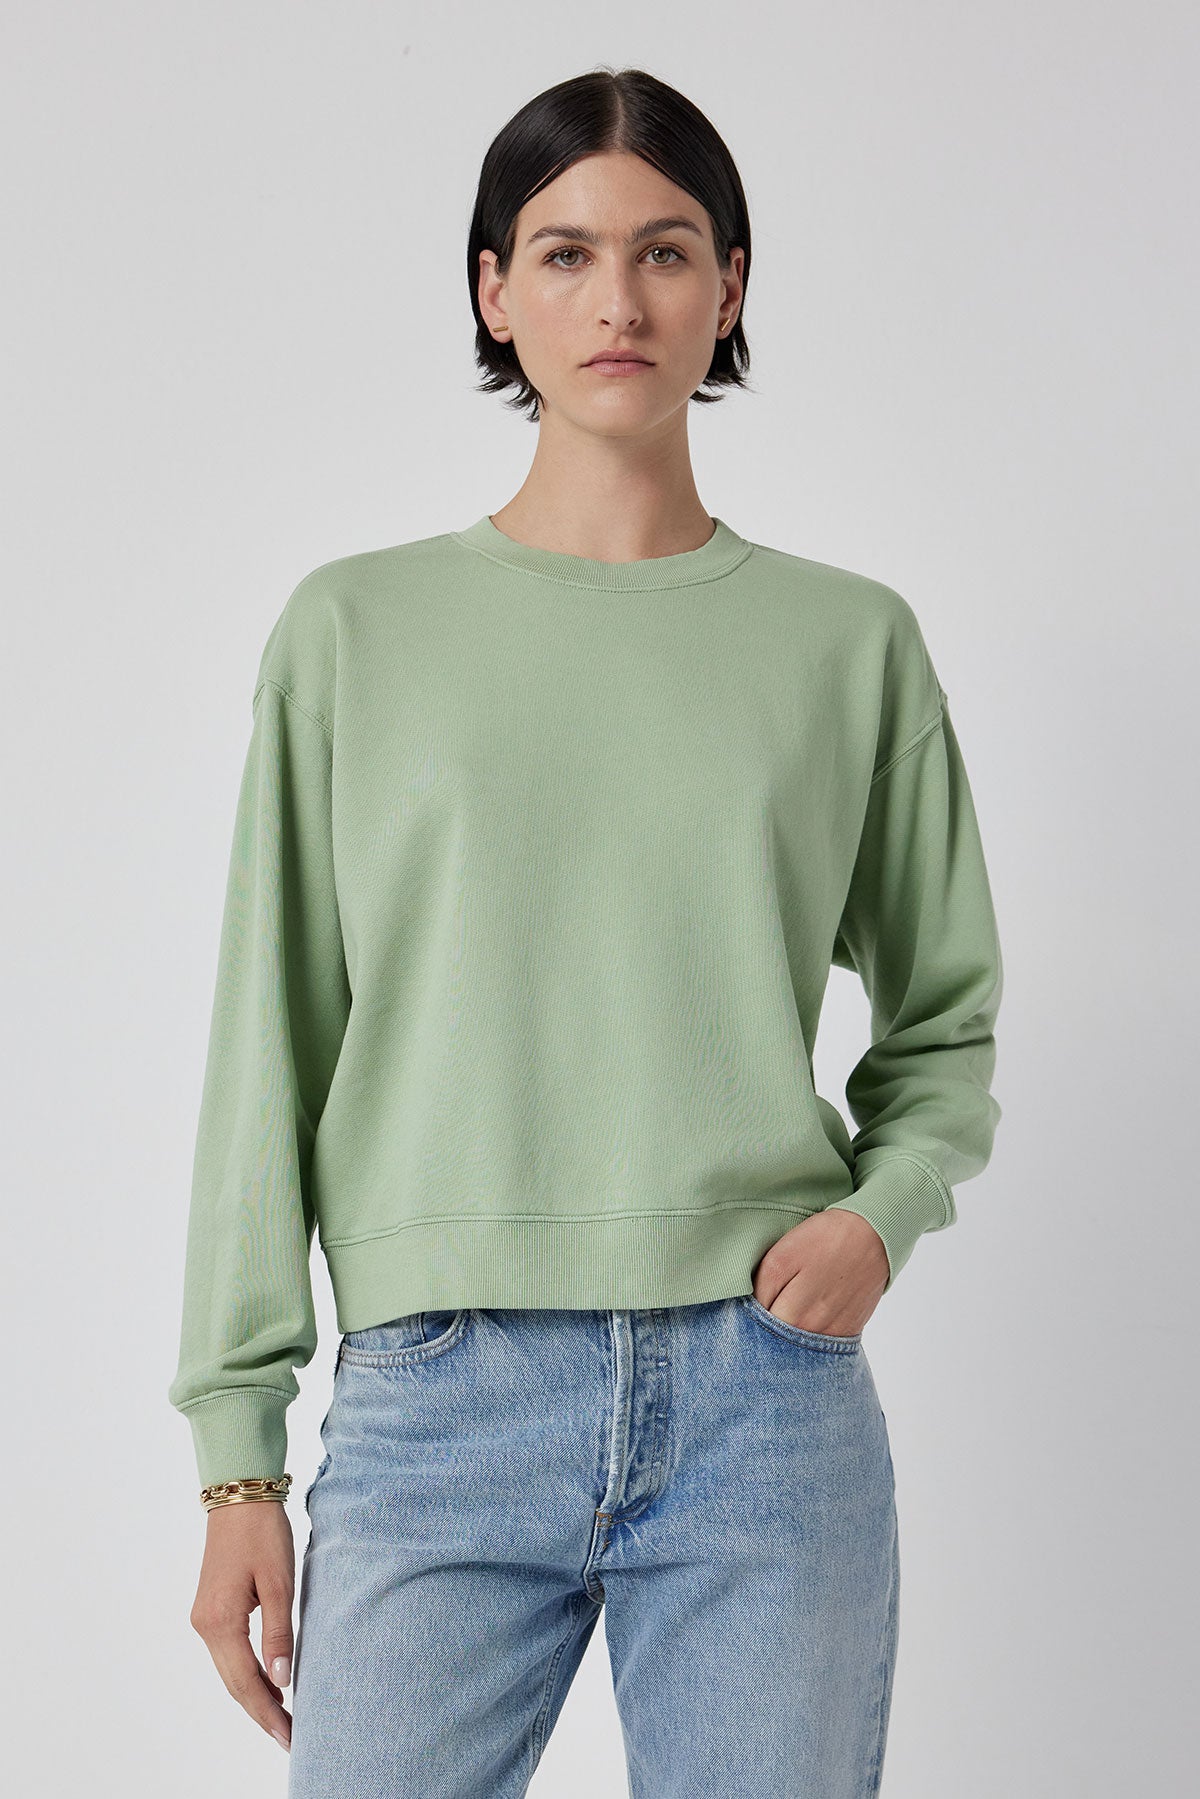   A model wearing a green YNEZ Sweatshirt and jeans made from organic cotton by Velvet by Jenny Graham. 